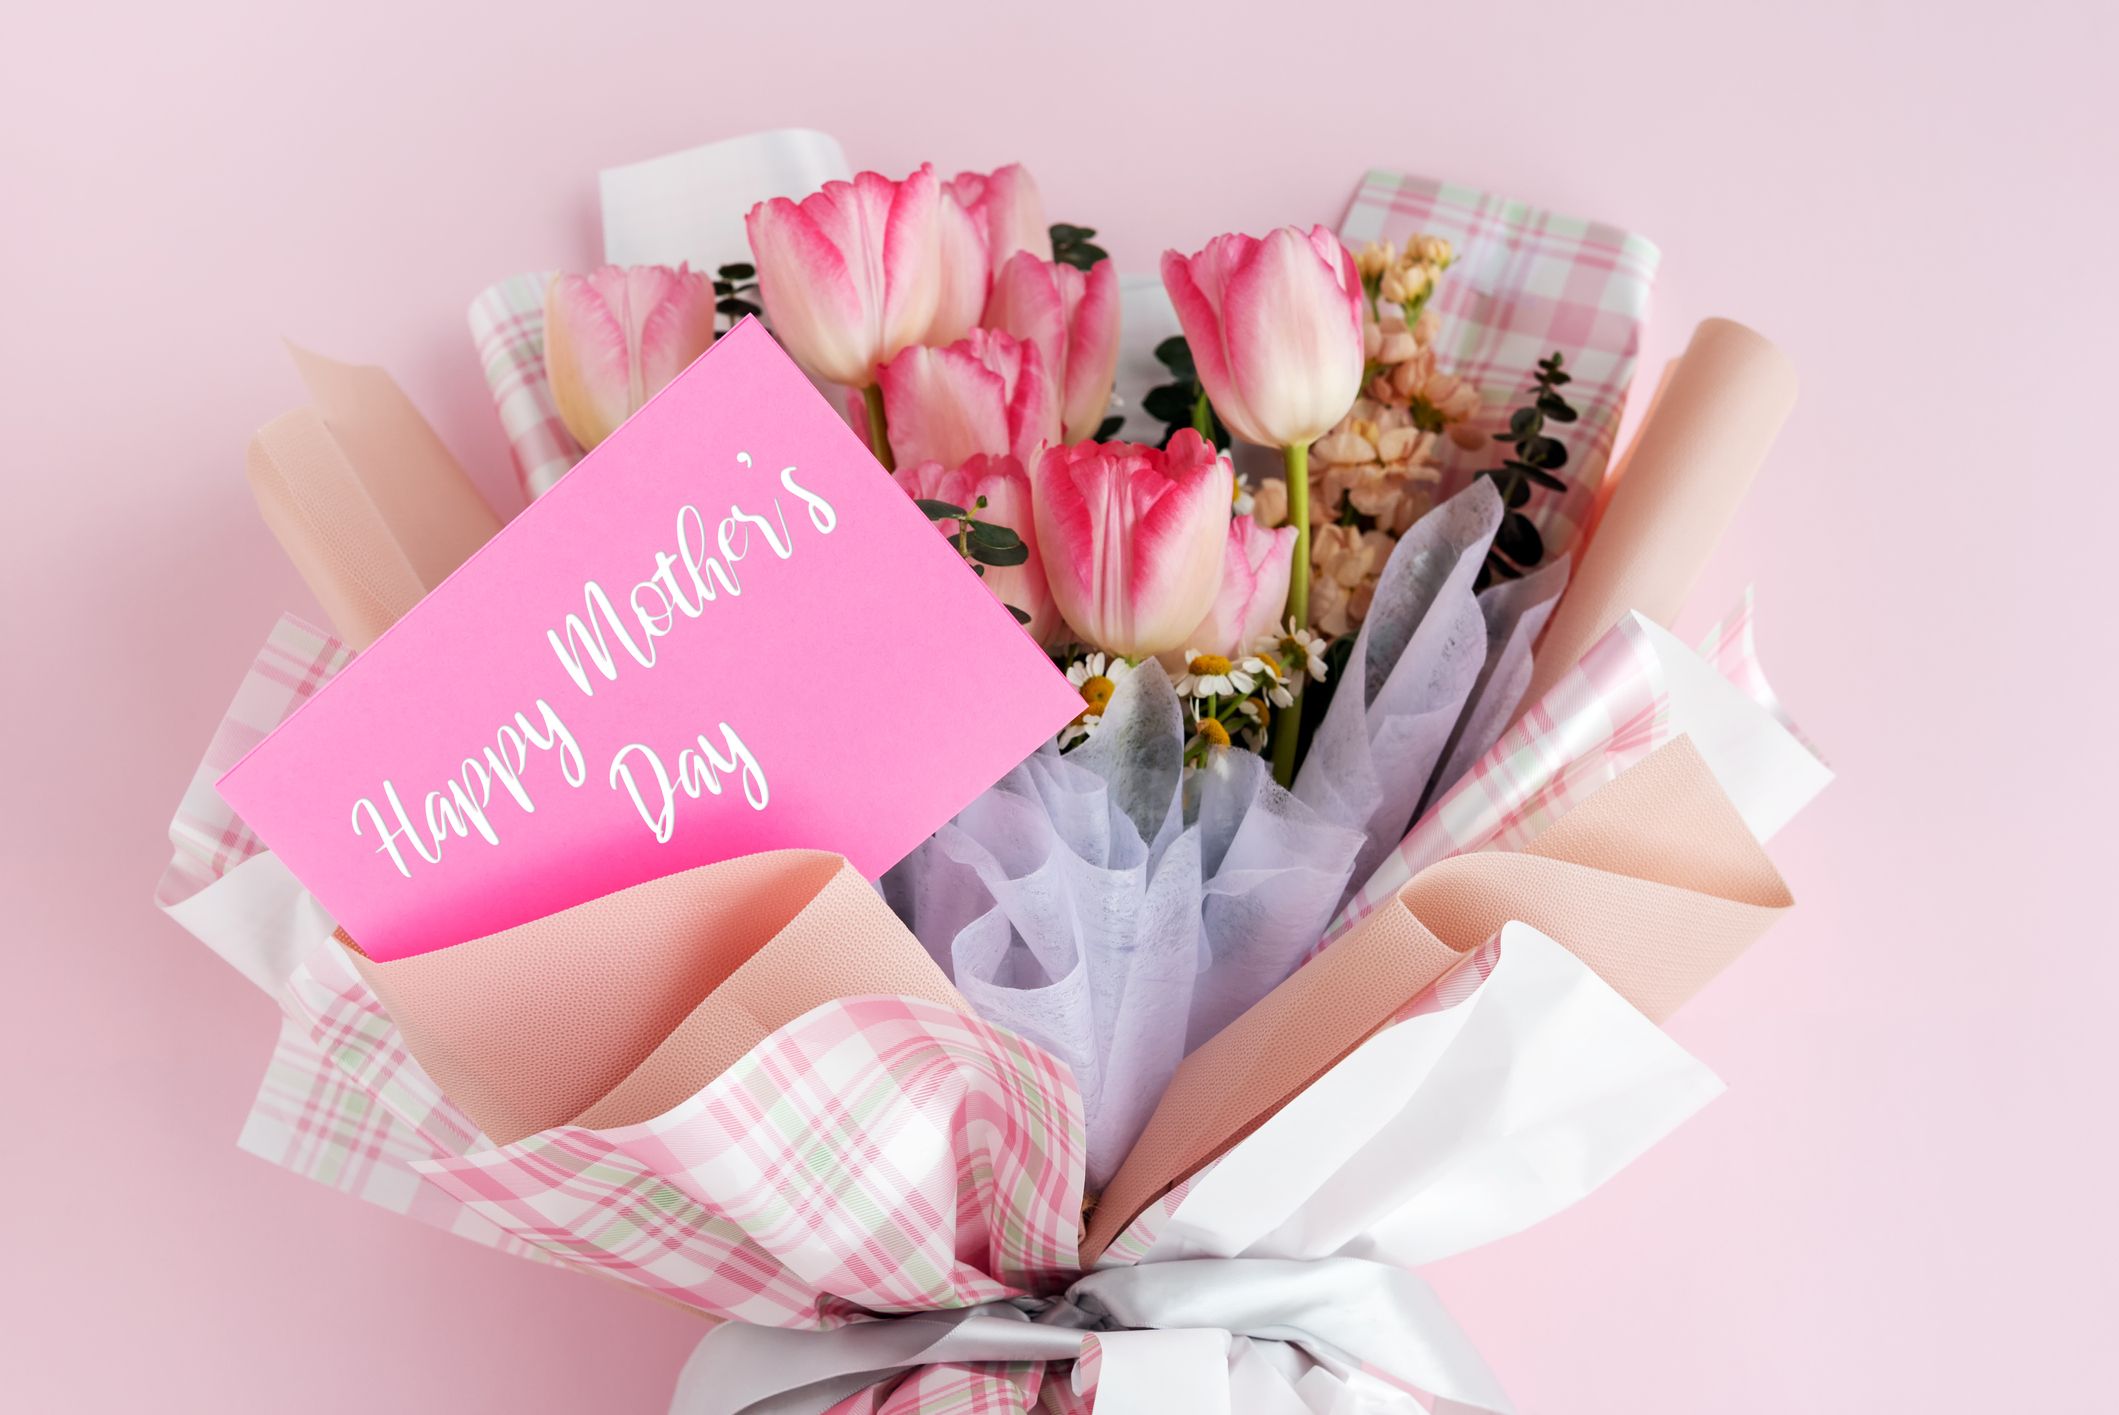 100 Cheap & Easy DIY Mother's Day Gifts